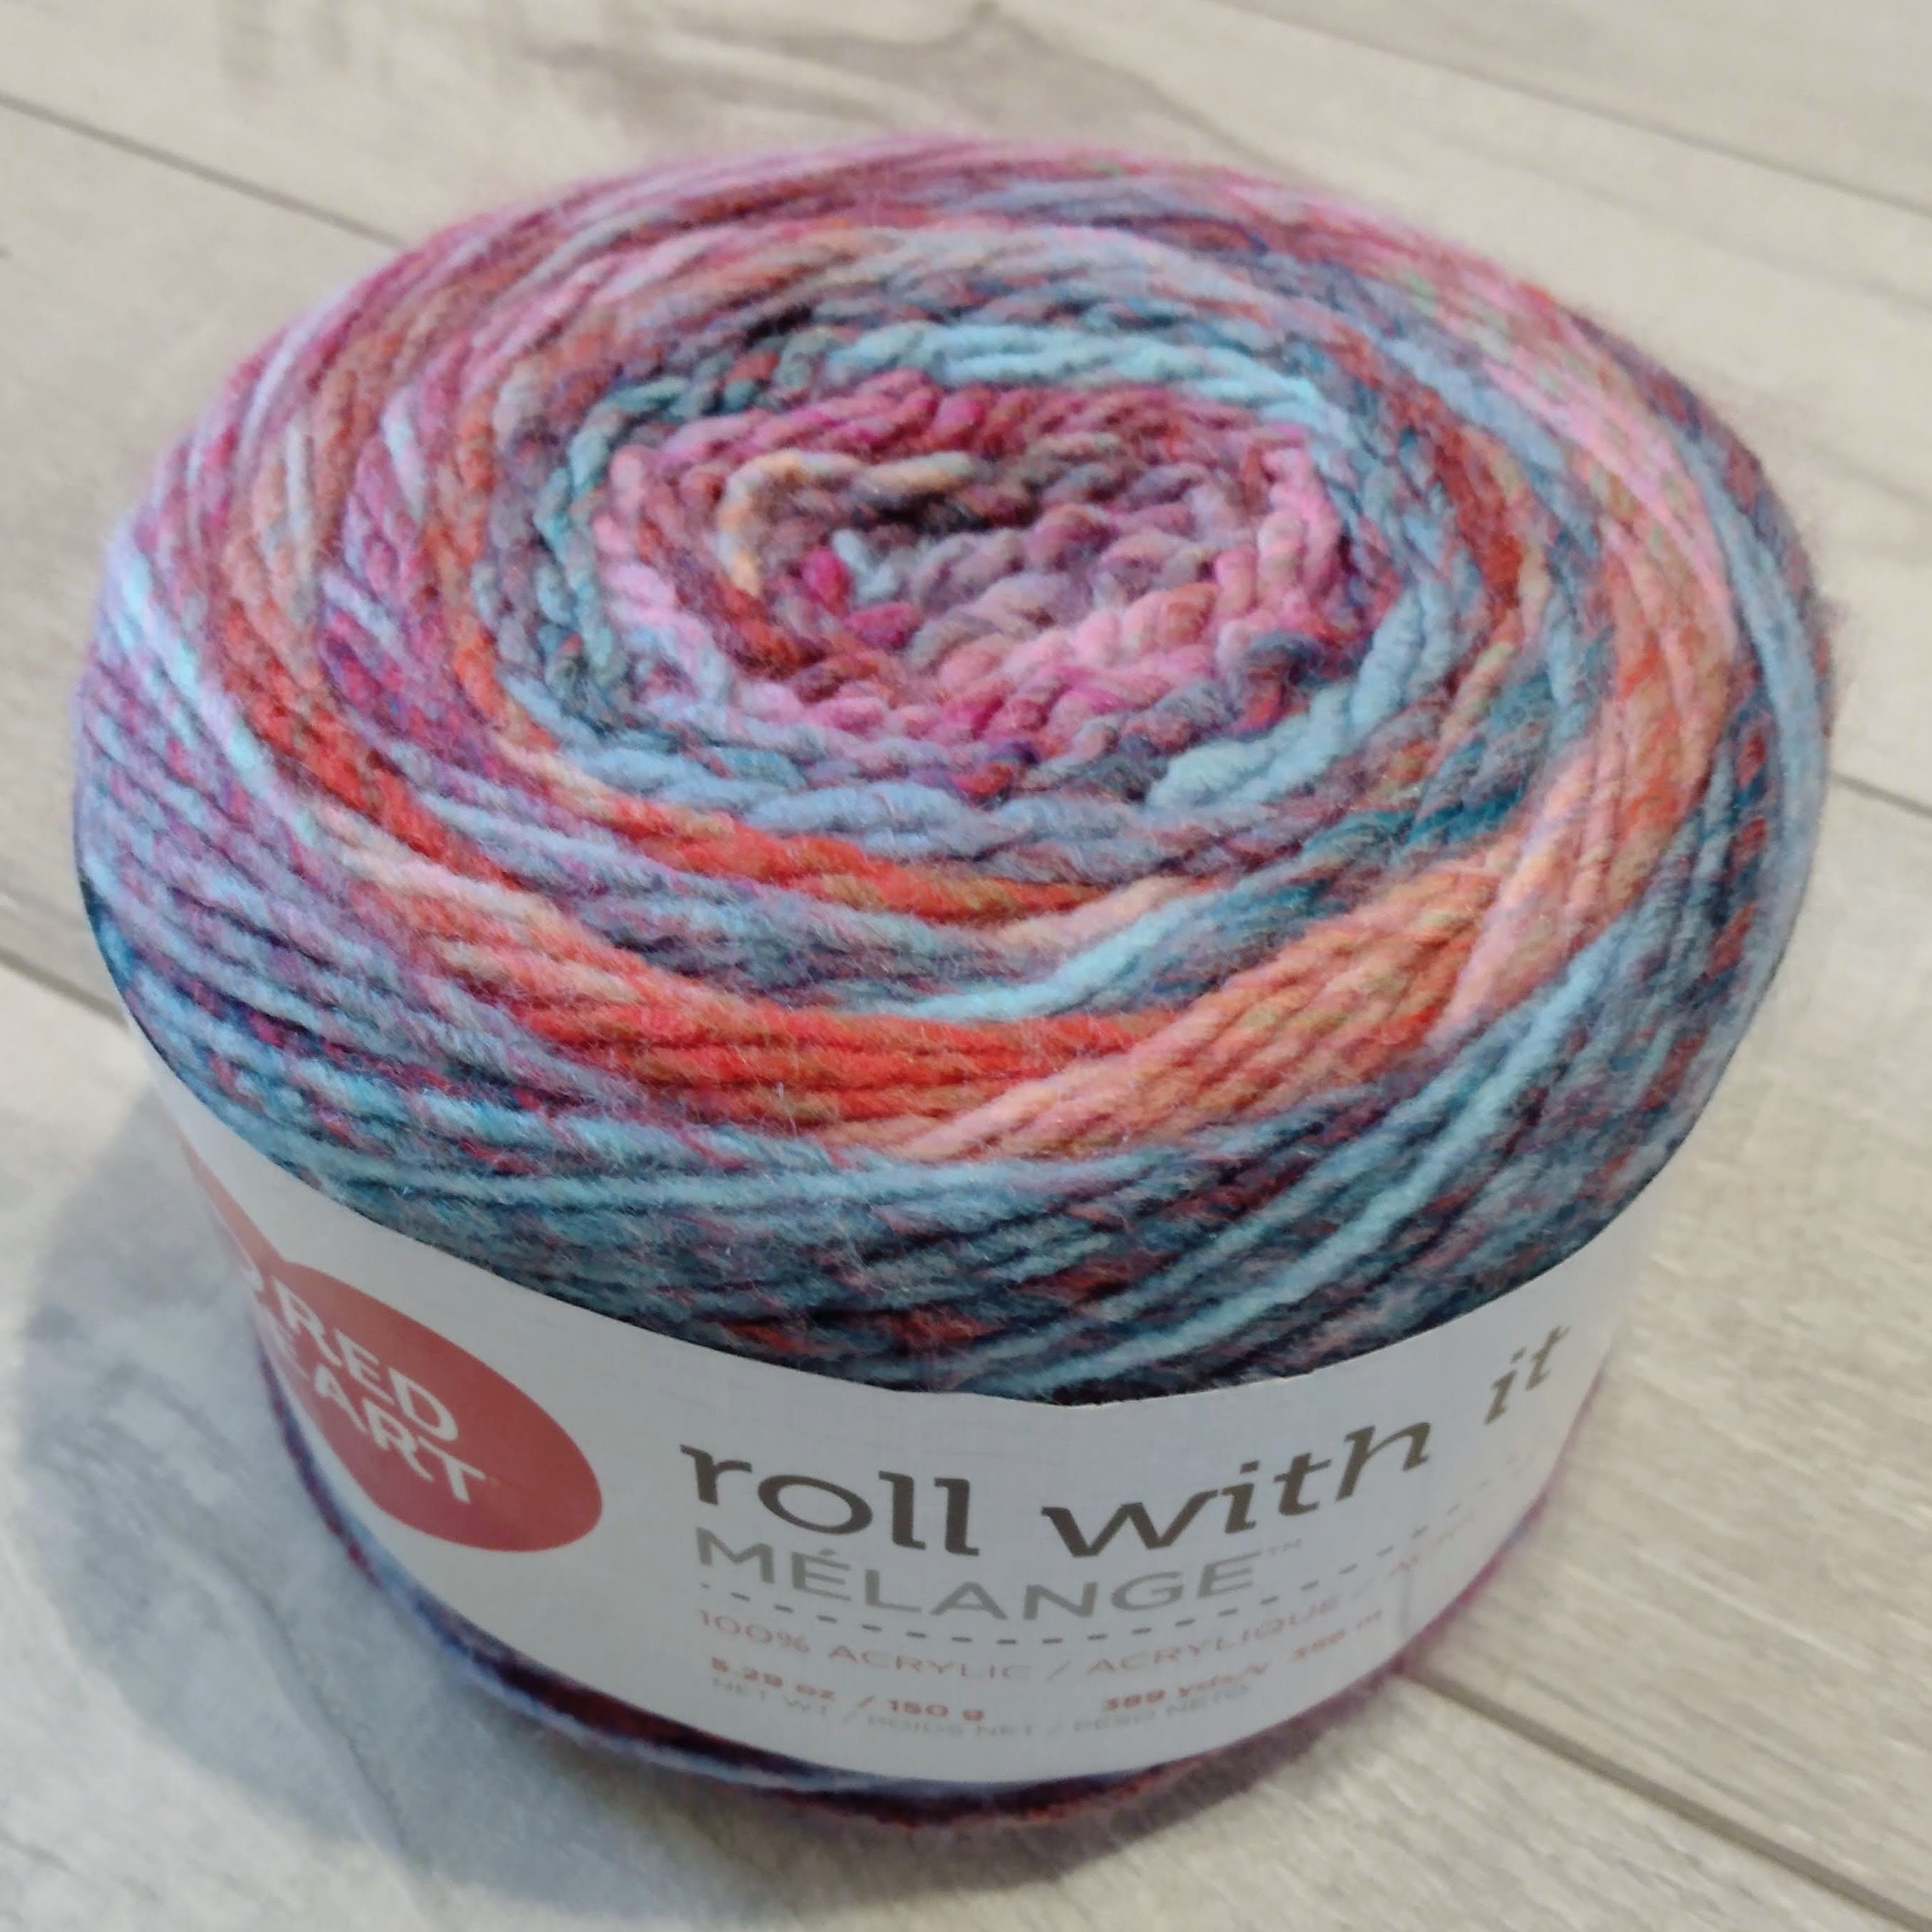 Red Heart Roll With It Melange Yarn HOLLYWOOD New Free Shipping 